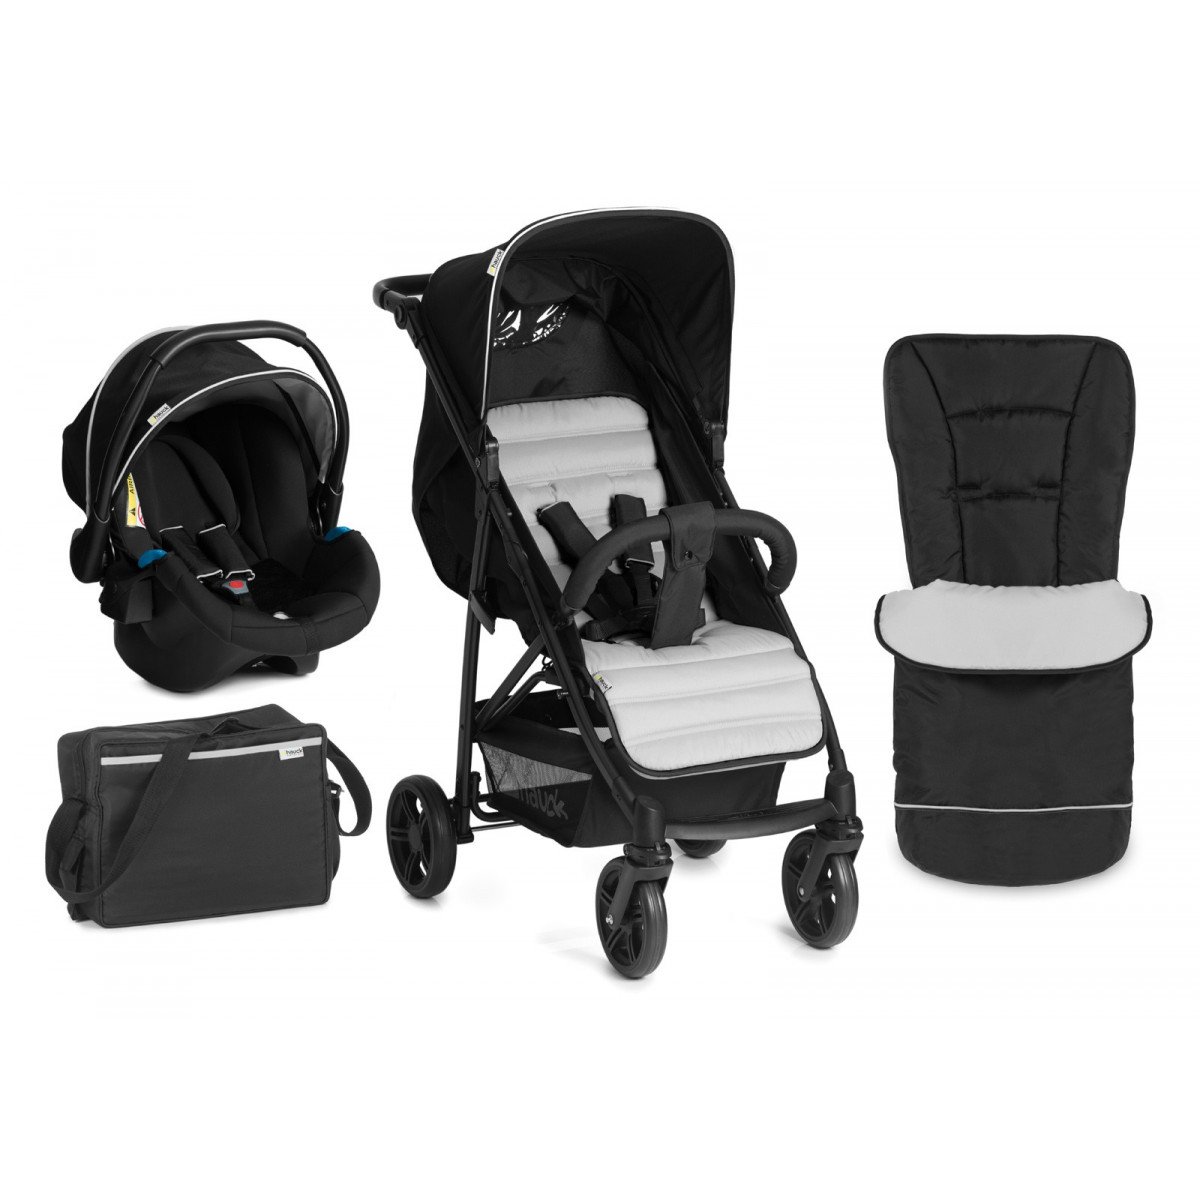 Group 0+ Car Seat, Compatible with Optional ISOFix Base, Foot muff, Changing Bag and Raincover from Birth to 22 Kg Hauck Rapid 4 Plus Shop N Drive Set Quick Fold Travel System Black/Silver